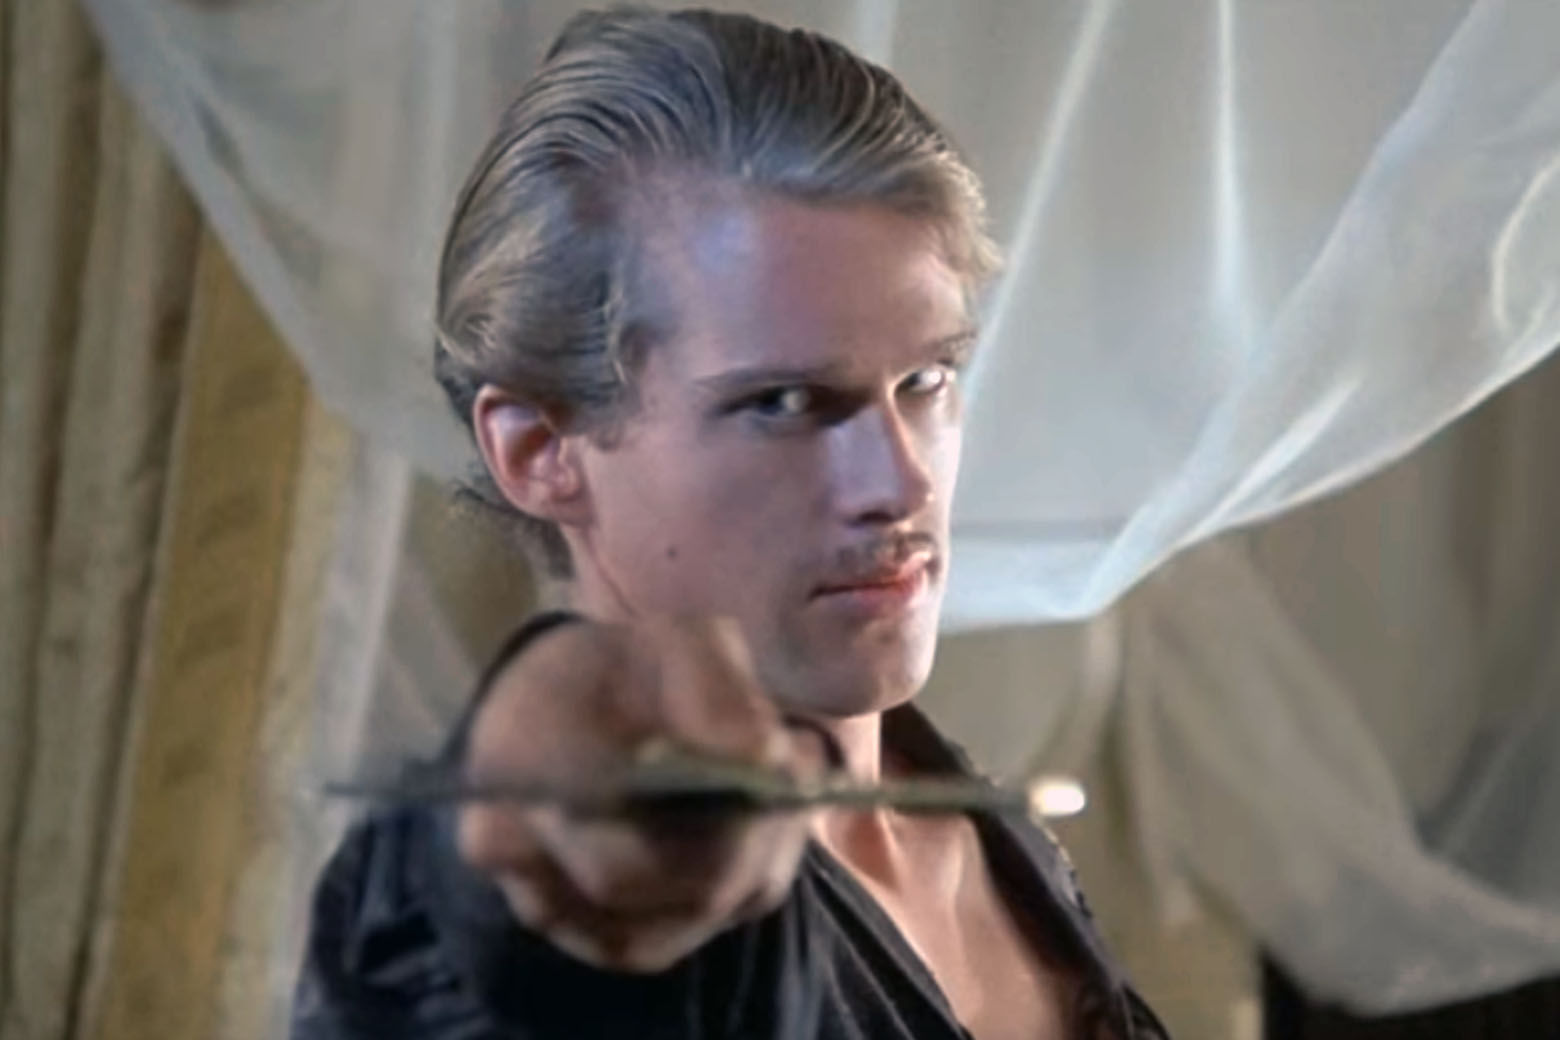 The Princess Bride - An Inconceivable Evening With Cary Elwes at Murat Theatre